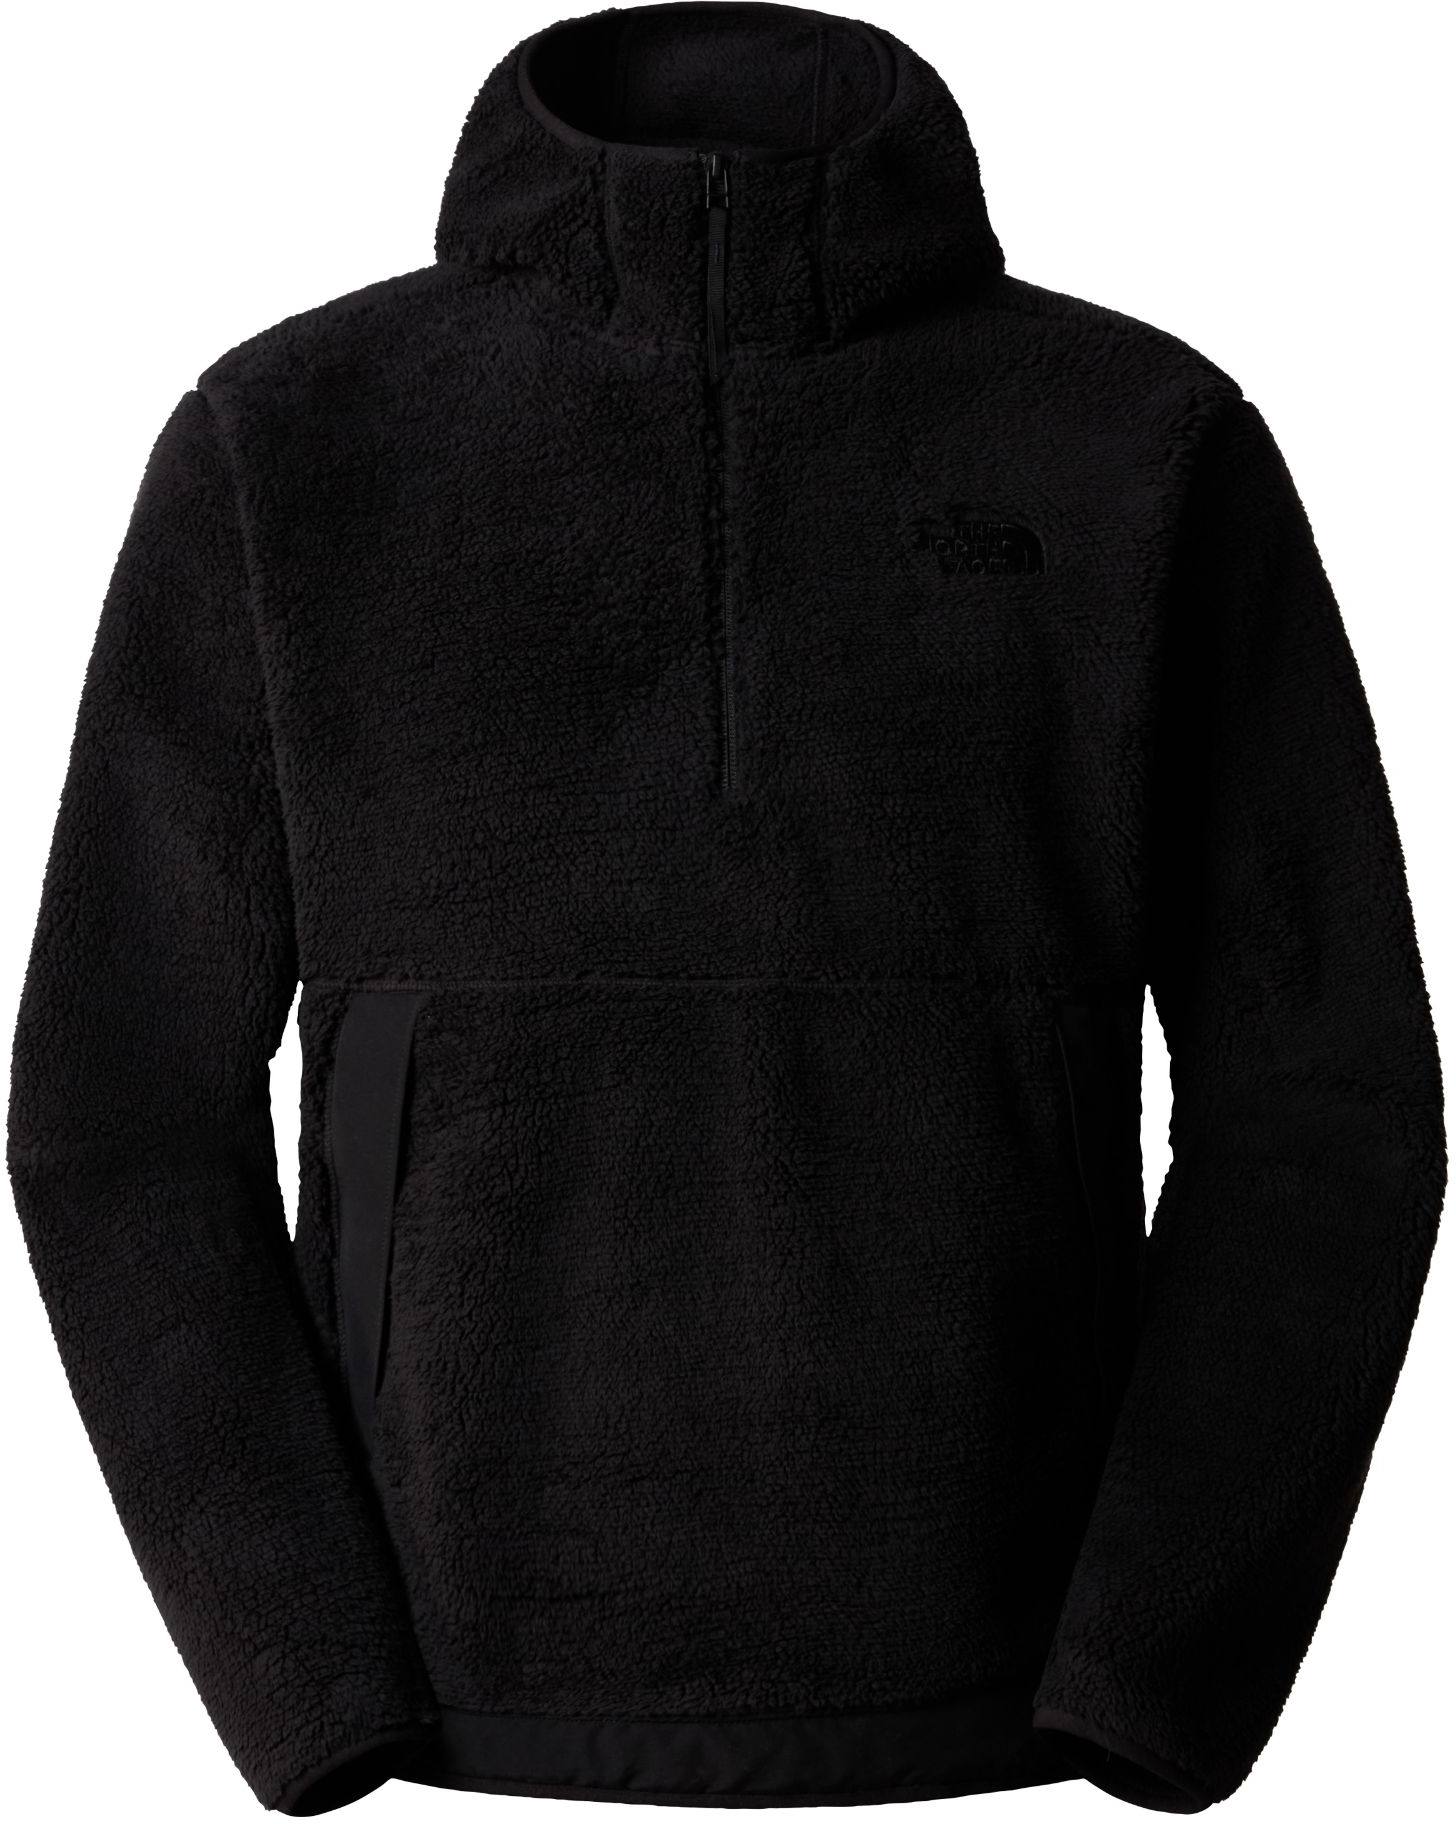 The North Face Men’s Campshire Fleece Hoodie